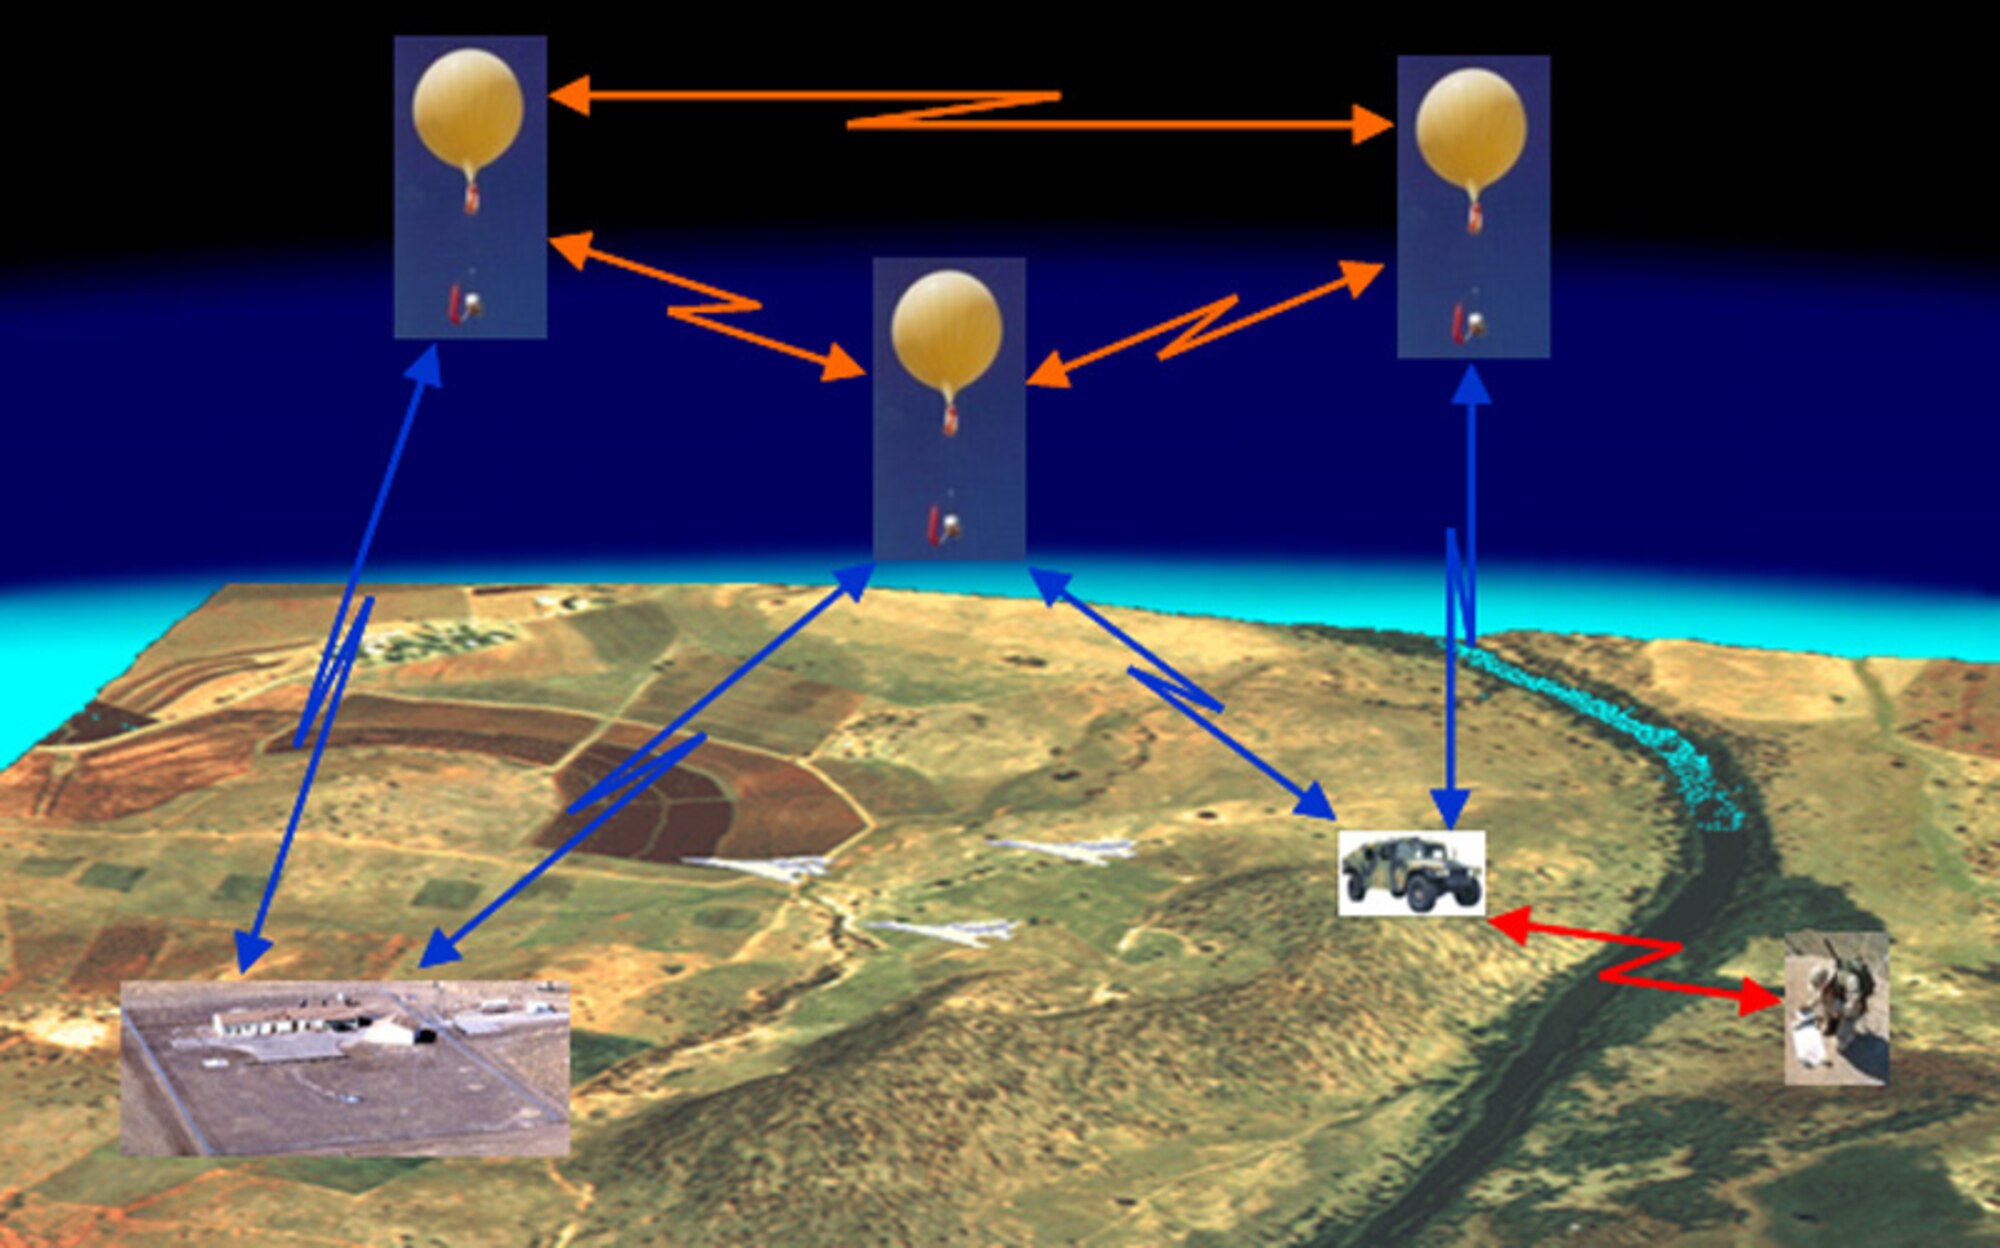 This illustration shows how the Combat Airborne Network could improve communication and situational awareness between the security forces on the ground and the missile alert facility by eliminating dead spots in the field and limiting signal degradation by establishing a wireless mesh network (Courtesy Illustration).